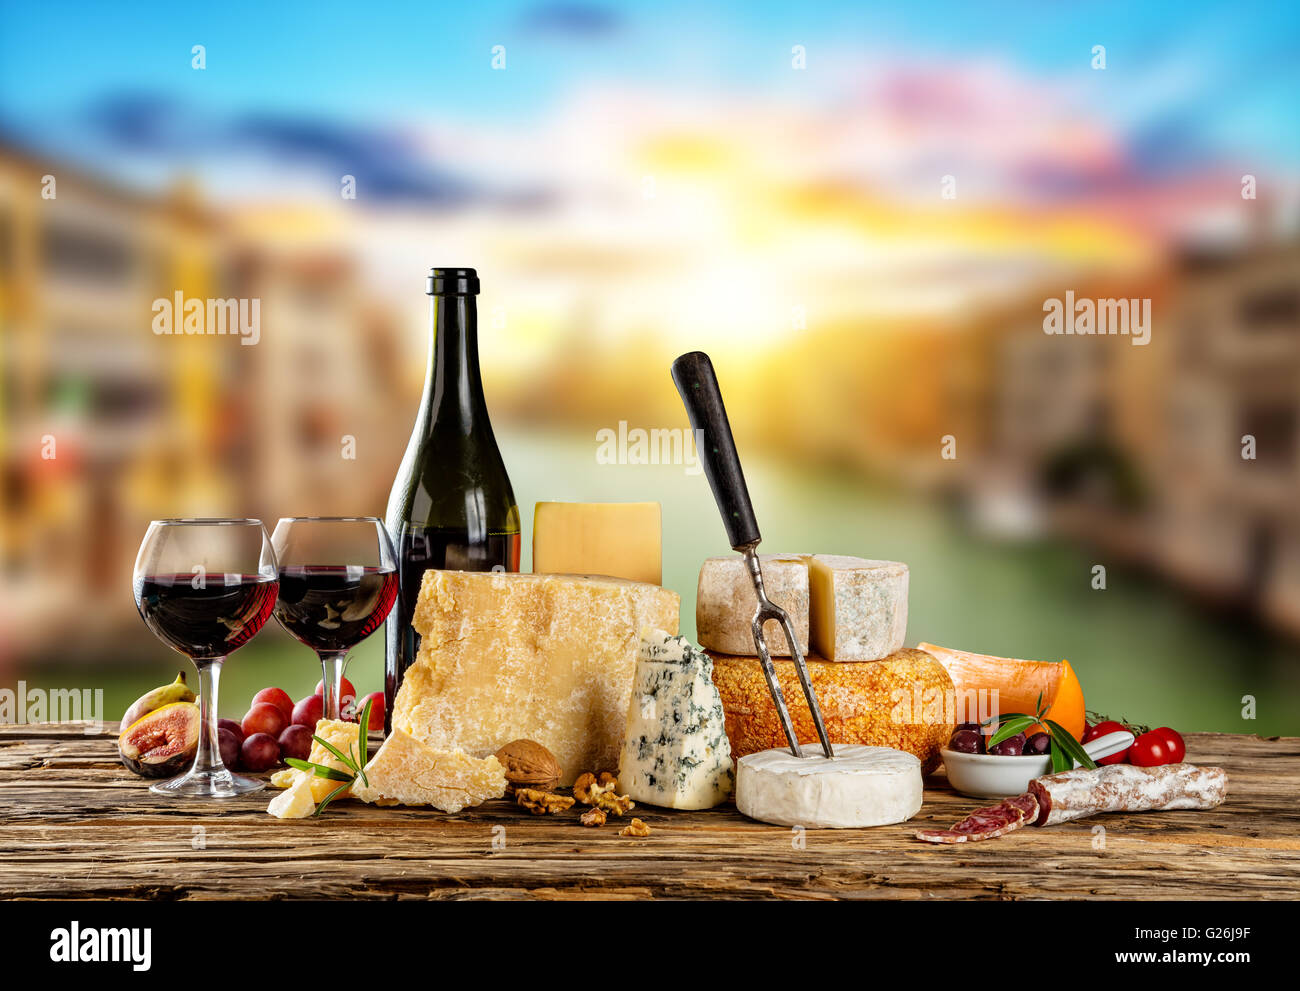 Various types of cheese, glasses and bottle of red wine placed on wooden table, copyspace for text. Blur old town on background Stock Photo